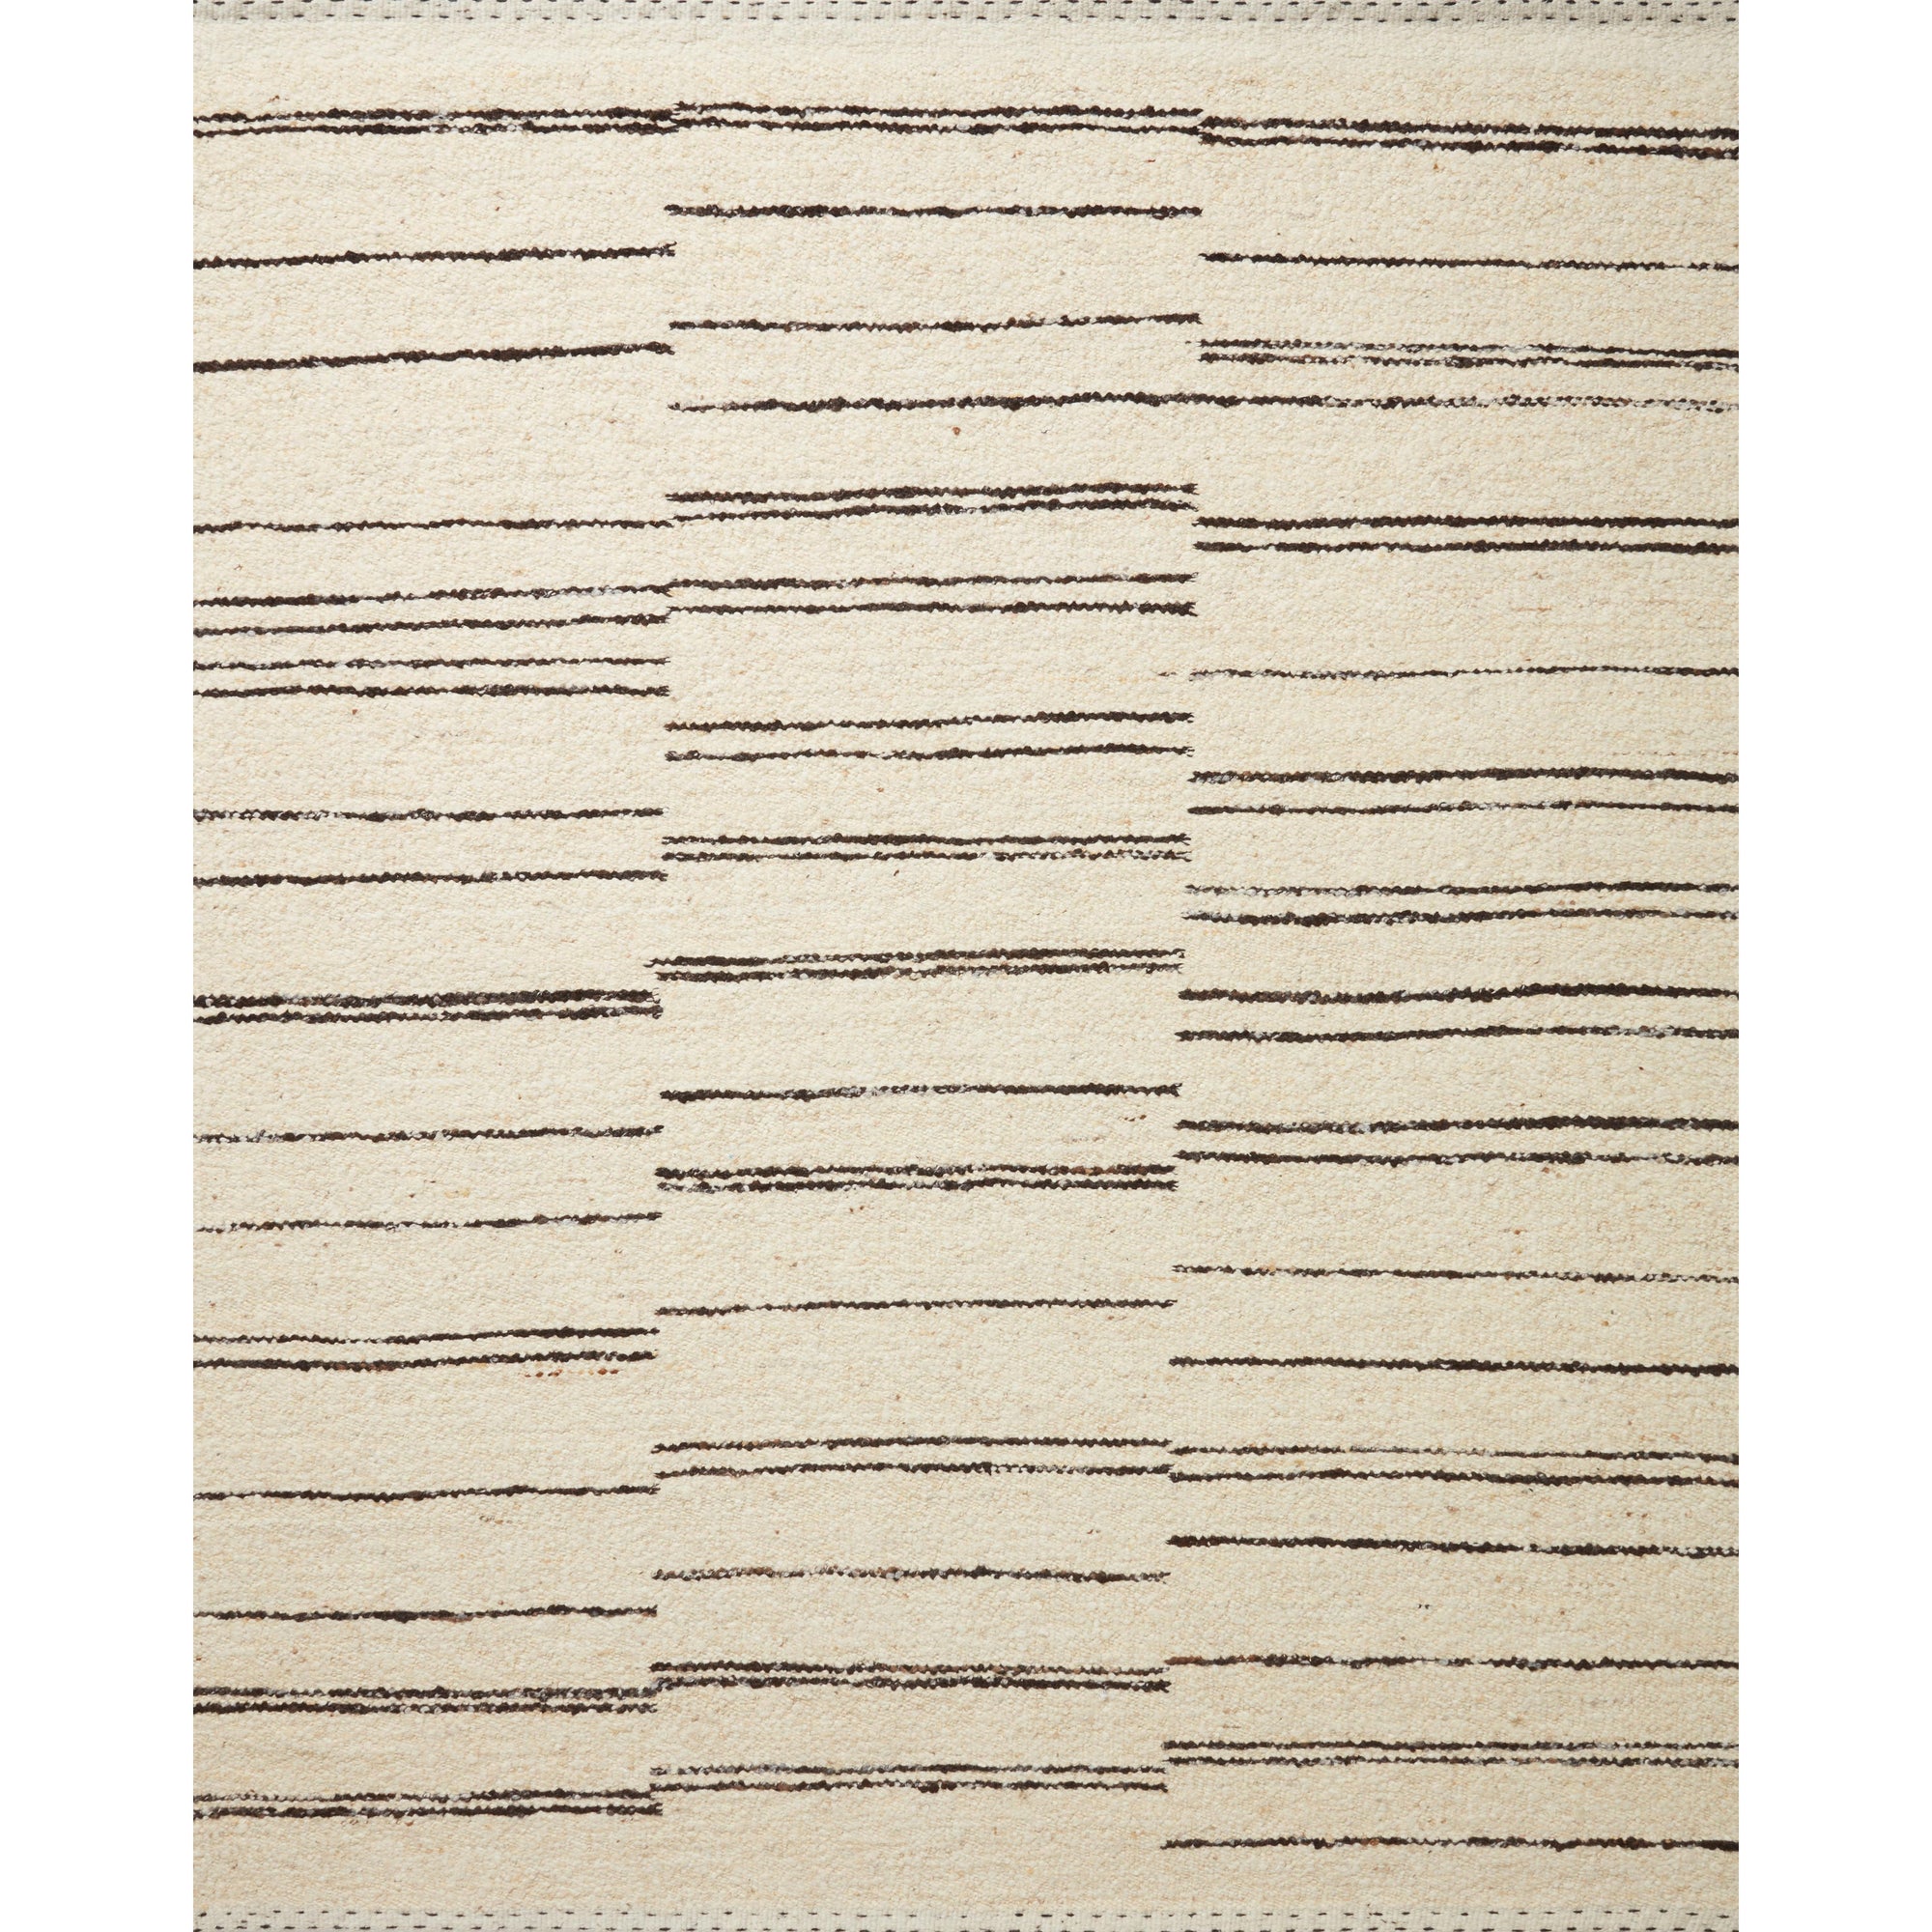 Rugs by Roo Loloi Roman Natural Charcoal Area Rug in size 18" x 18" Sample